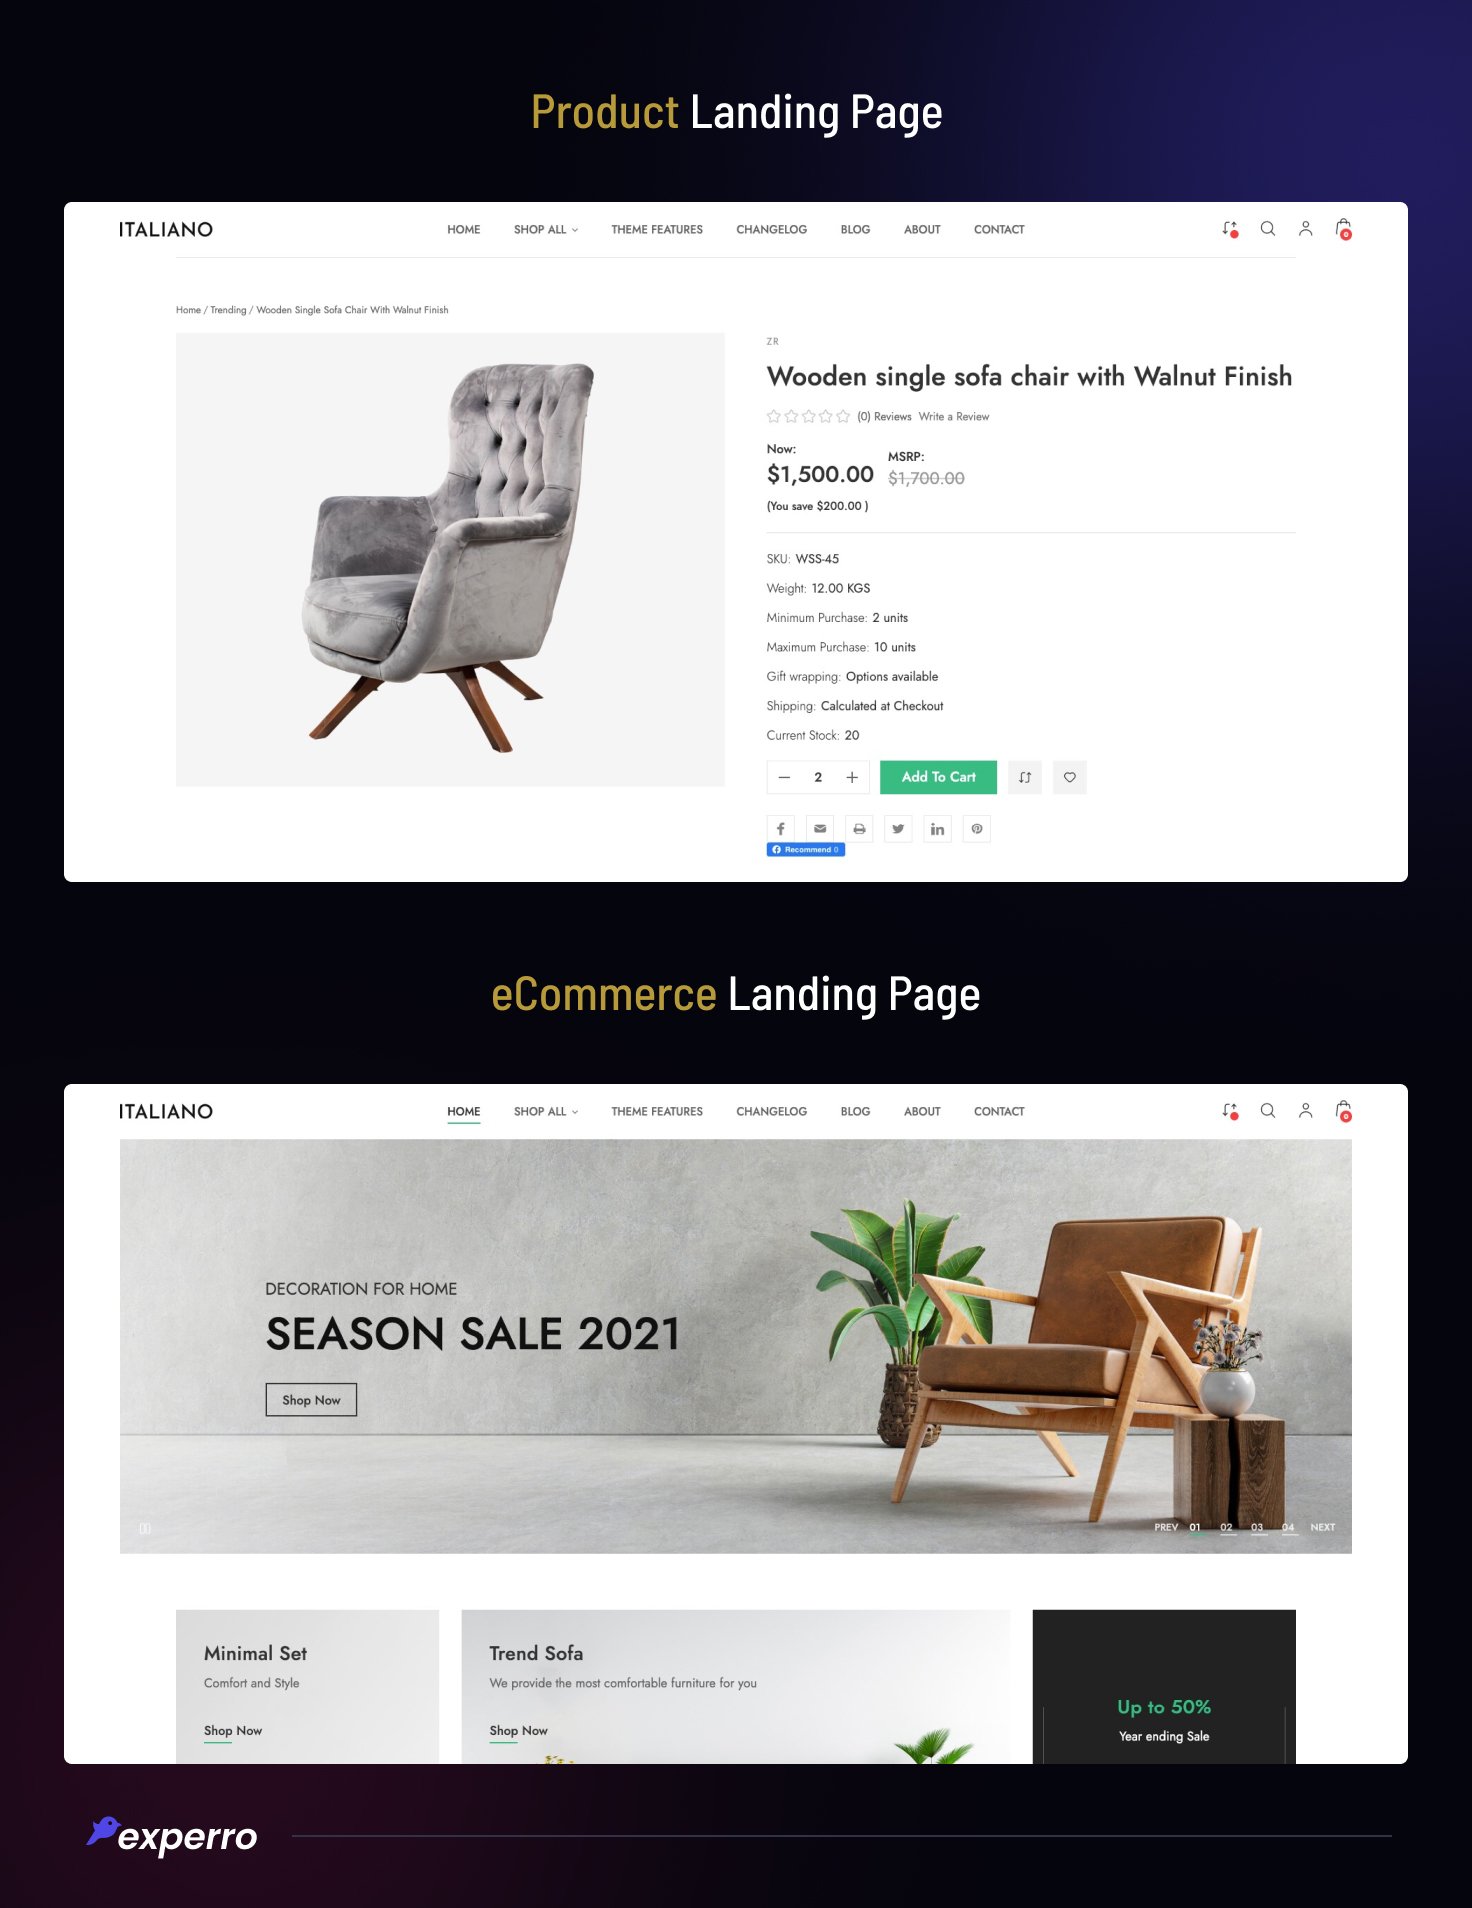 What is eCommerce & Product Landing Page